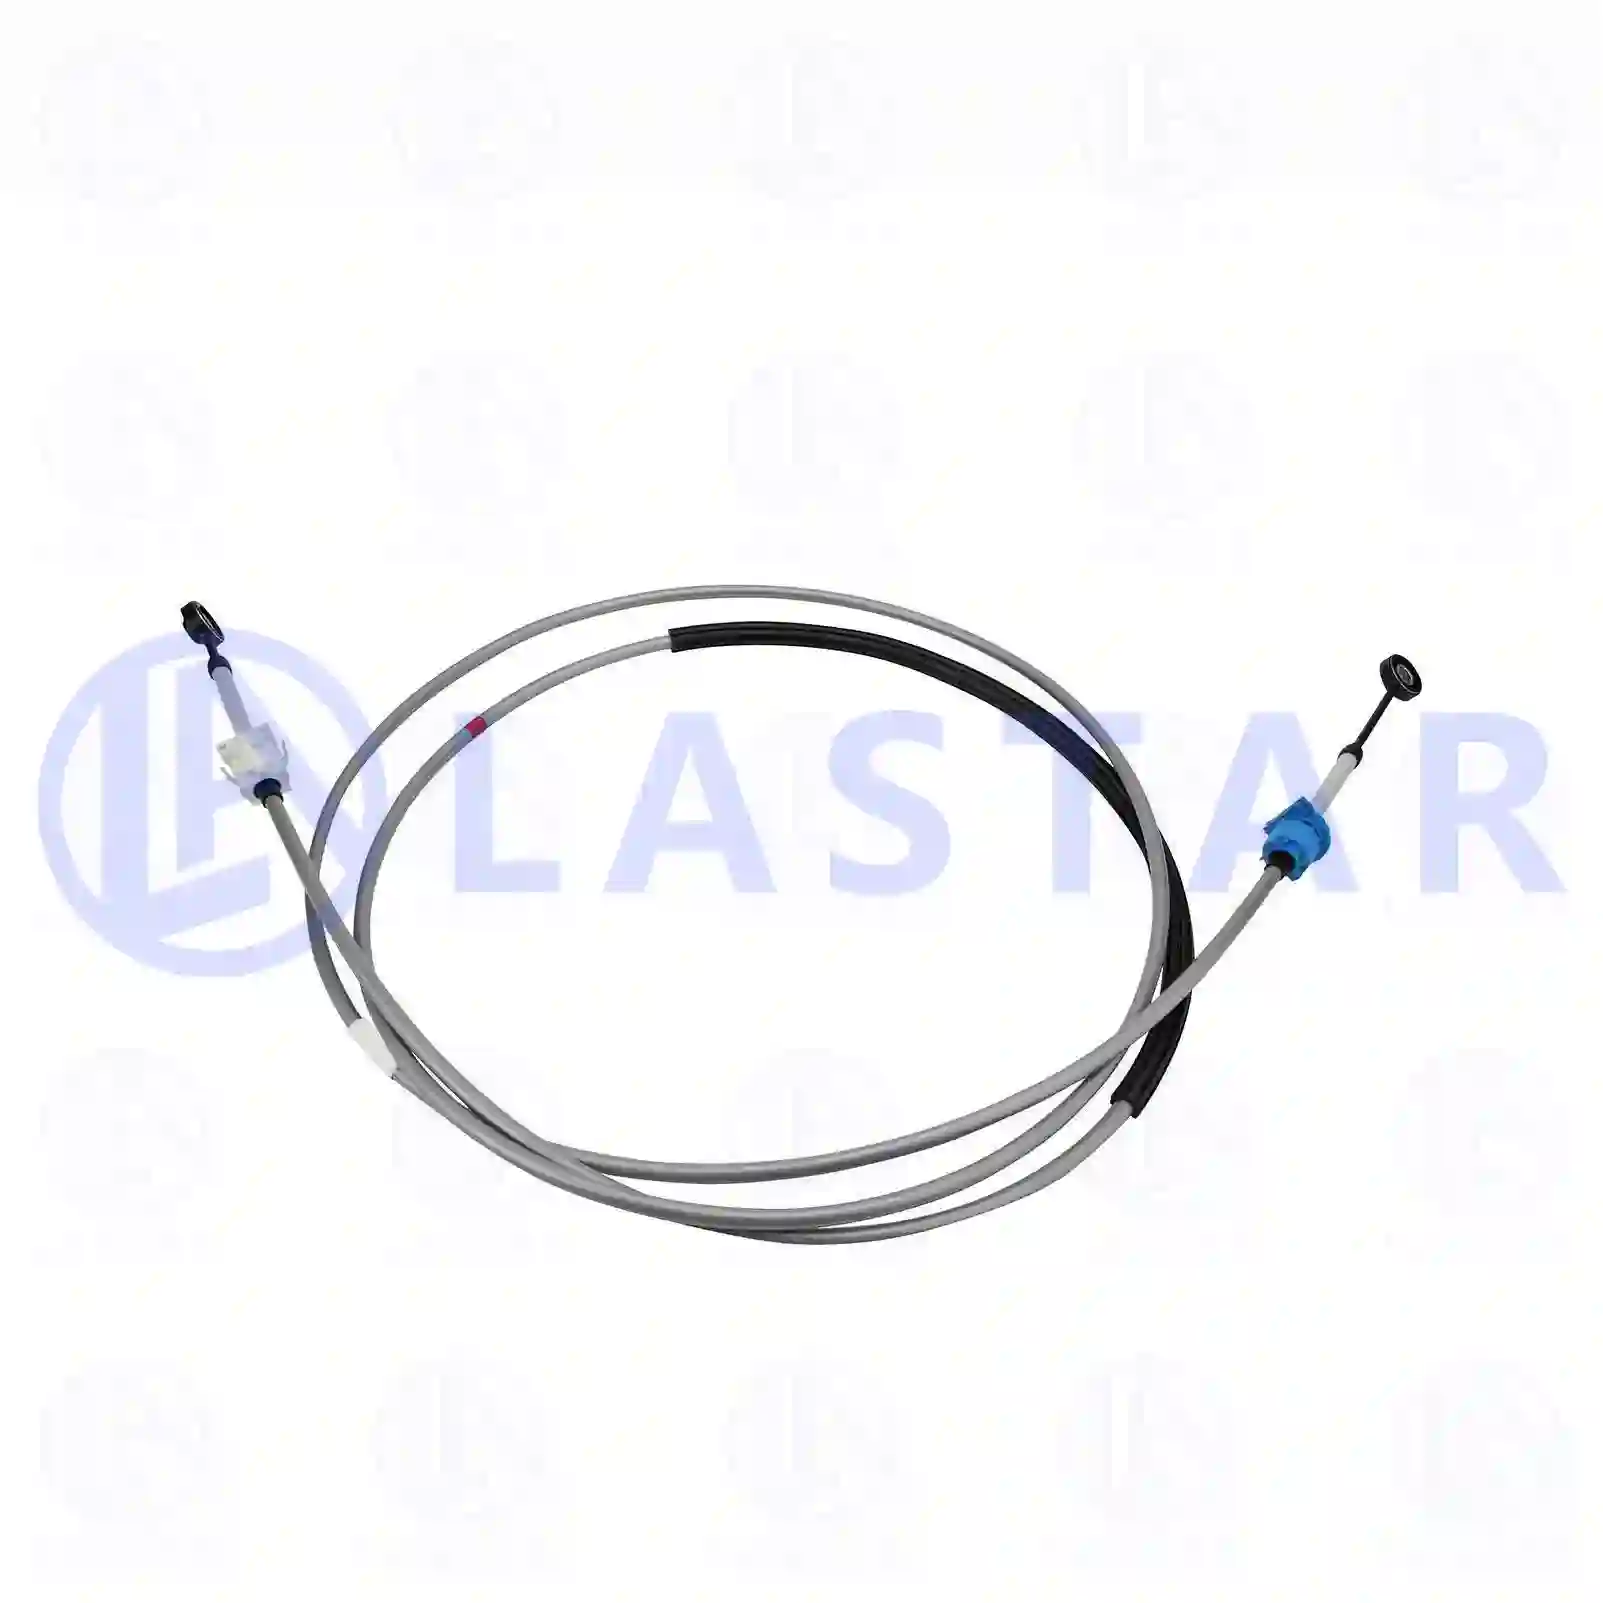 Control cable, switching, 77732692, 21343545, 217897 ||  77732692 Lastar Spare Part | Truck Spare Parts, Auotomotive Spare Parts Control cable, switching, 77732692, 21343545, 217897 ||  77732692 Lastar Spare Part | Truck Spare Parts, Auotomotive Spare Parts